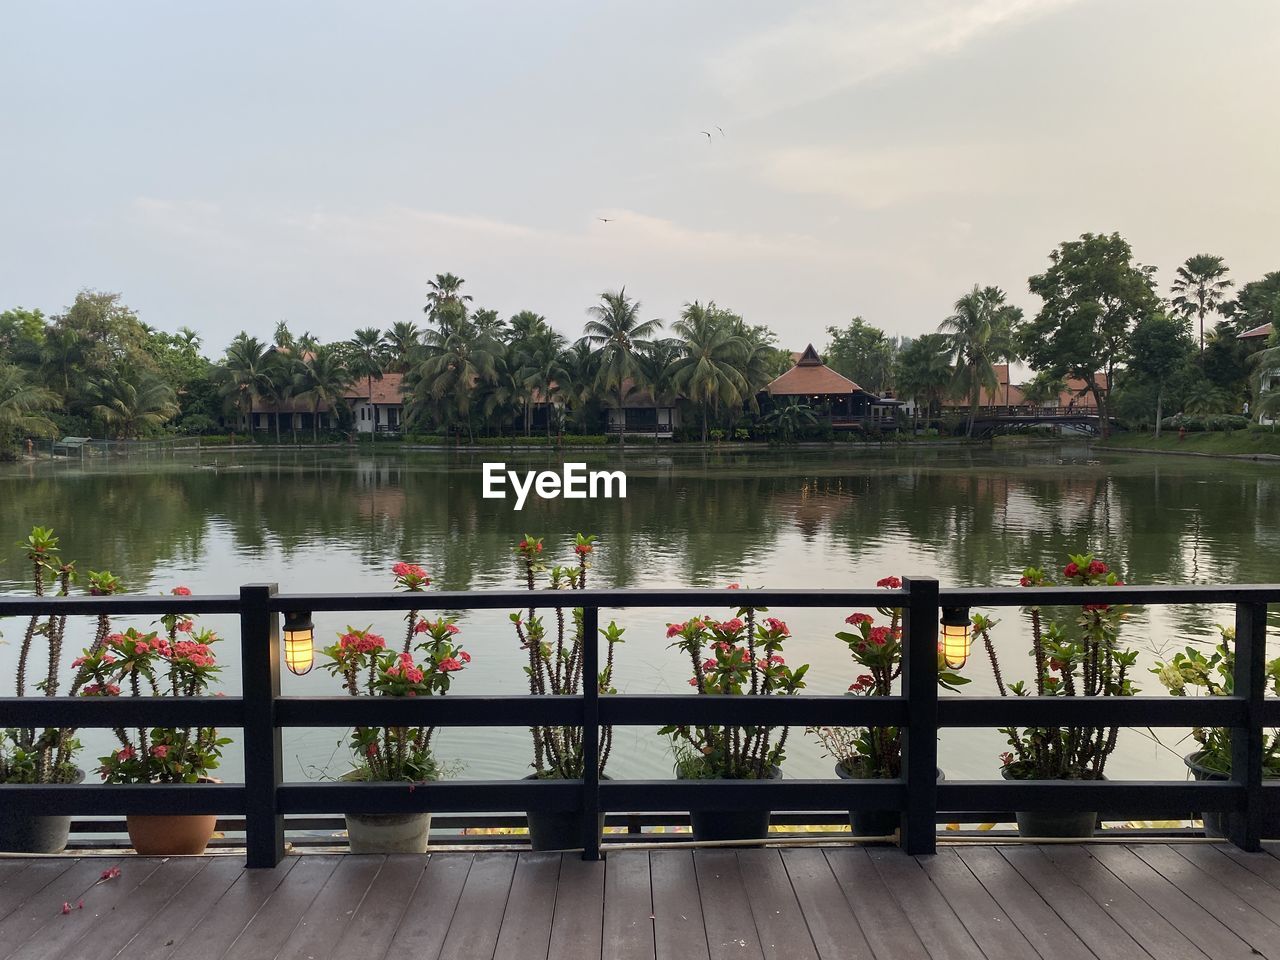 water, tree, nature, plant, lake, sky, architecture, wood, reflection, tranquility, travel destinations, built structure, beauty in nature, travel, outdoors, railing, no people, scenics - nature, pier, tourism, environment, day, holiday, trip, tranquil scene, tropical climate, landscape, vacation, relaxation, transportation, cloud